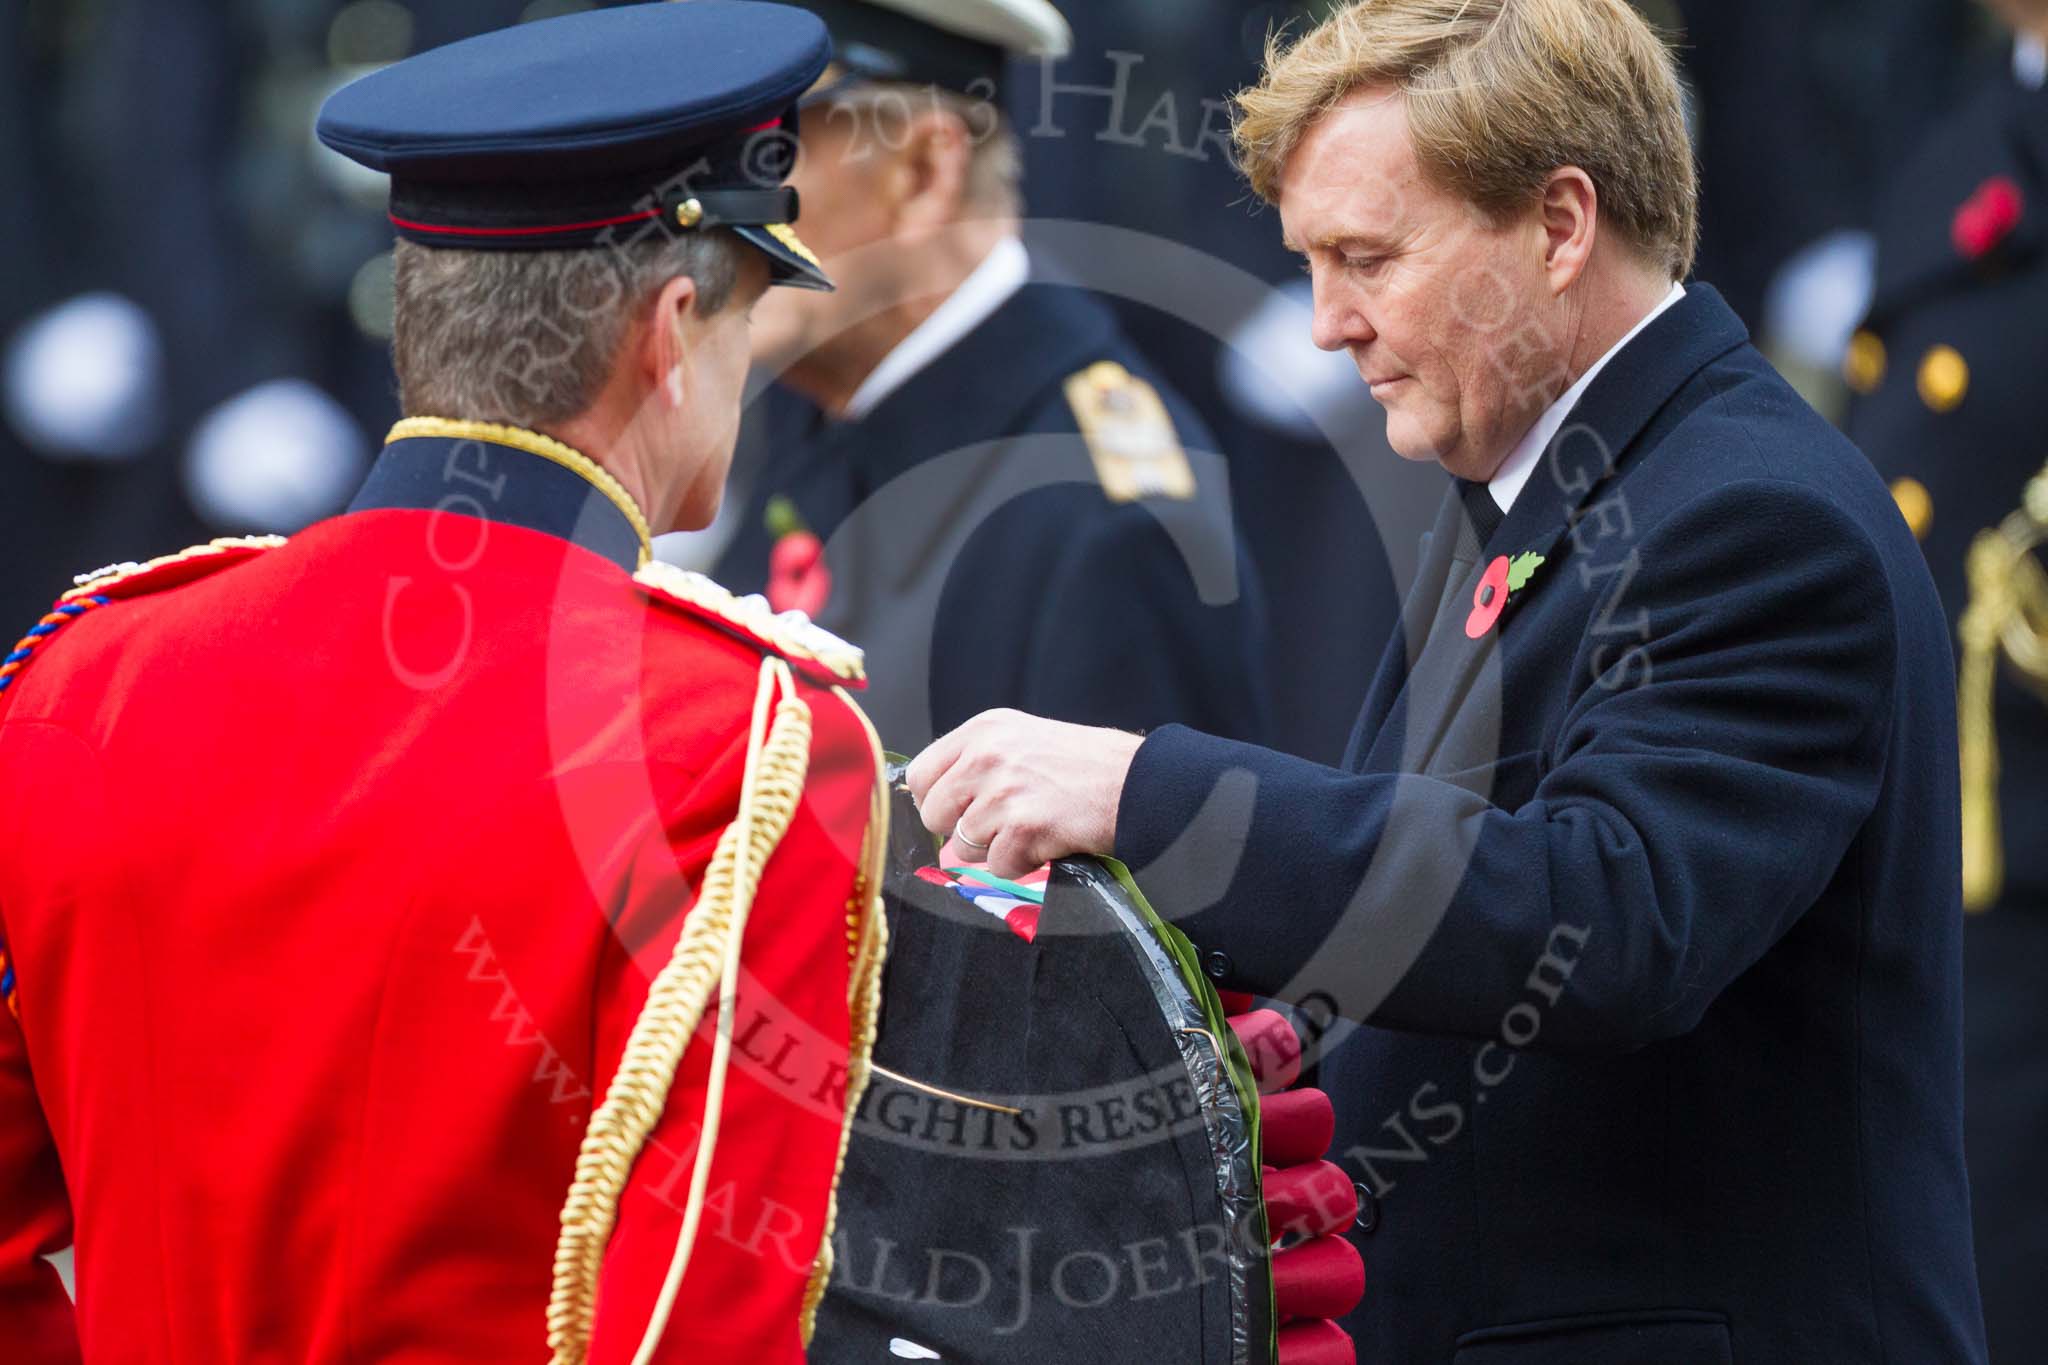 Remembrance Sunday at the Cenotaph 2015: HM The King of the Netherlands reveiving his wreath from his equerry, Major-General  Hans  van  der  Louw. Image #180, 08 November 2015 11:04 Whitehall, London, UK